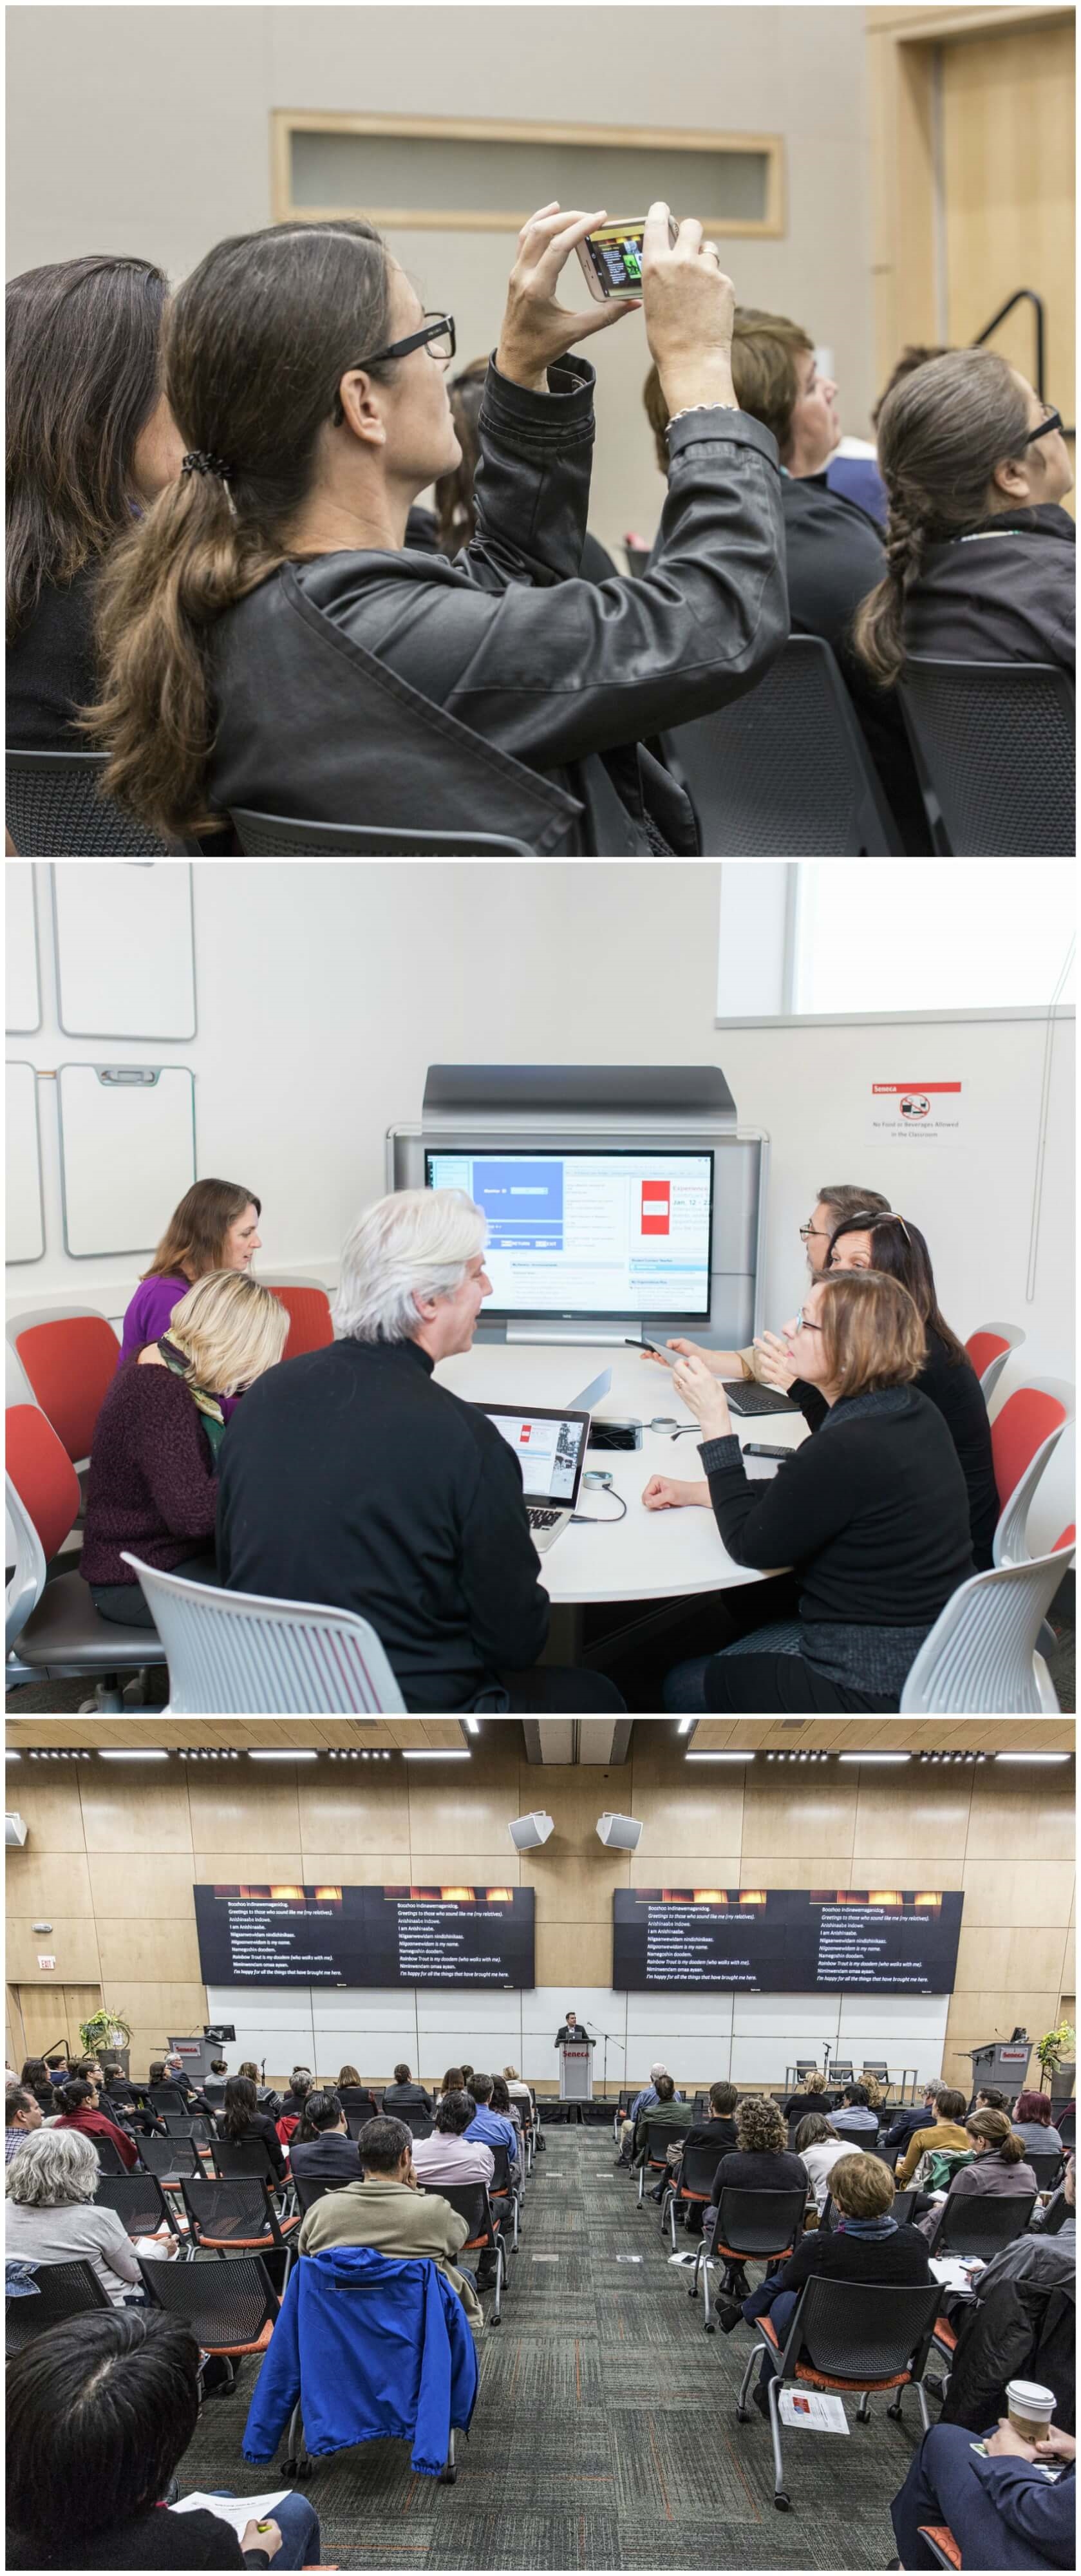 Three images from past Teacing & Learning Days. The top image is a close-up of an audience member taking a picture of a slide during the keynote presentation; the middle image shows a group of people around a computer; the bottom image shows the keynote speaker addressing a room full of people.